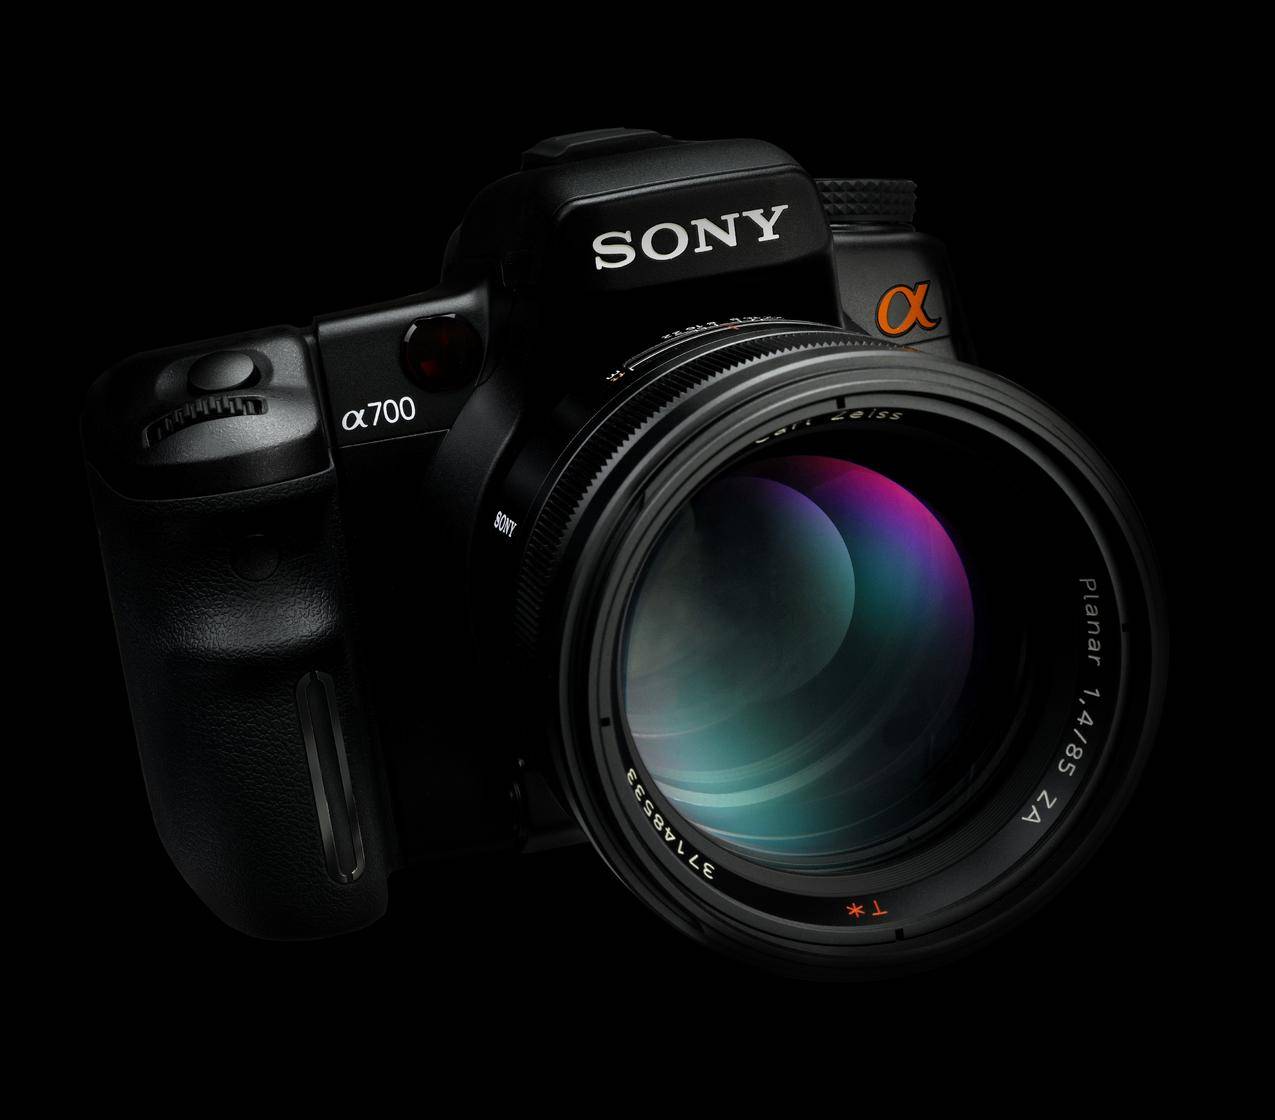 Sony's A5000 is the best sub-$500 camera around